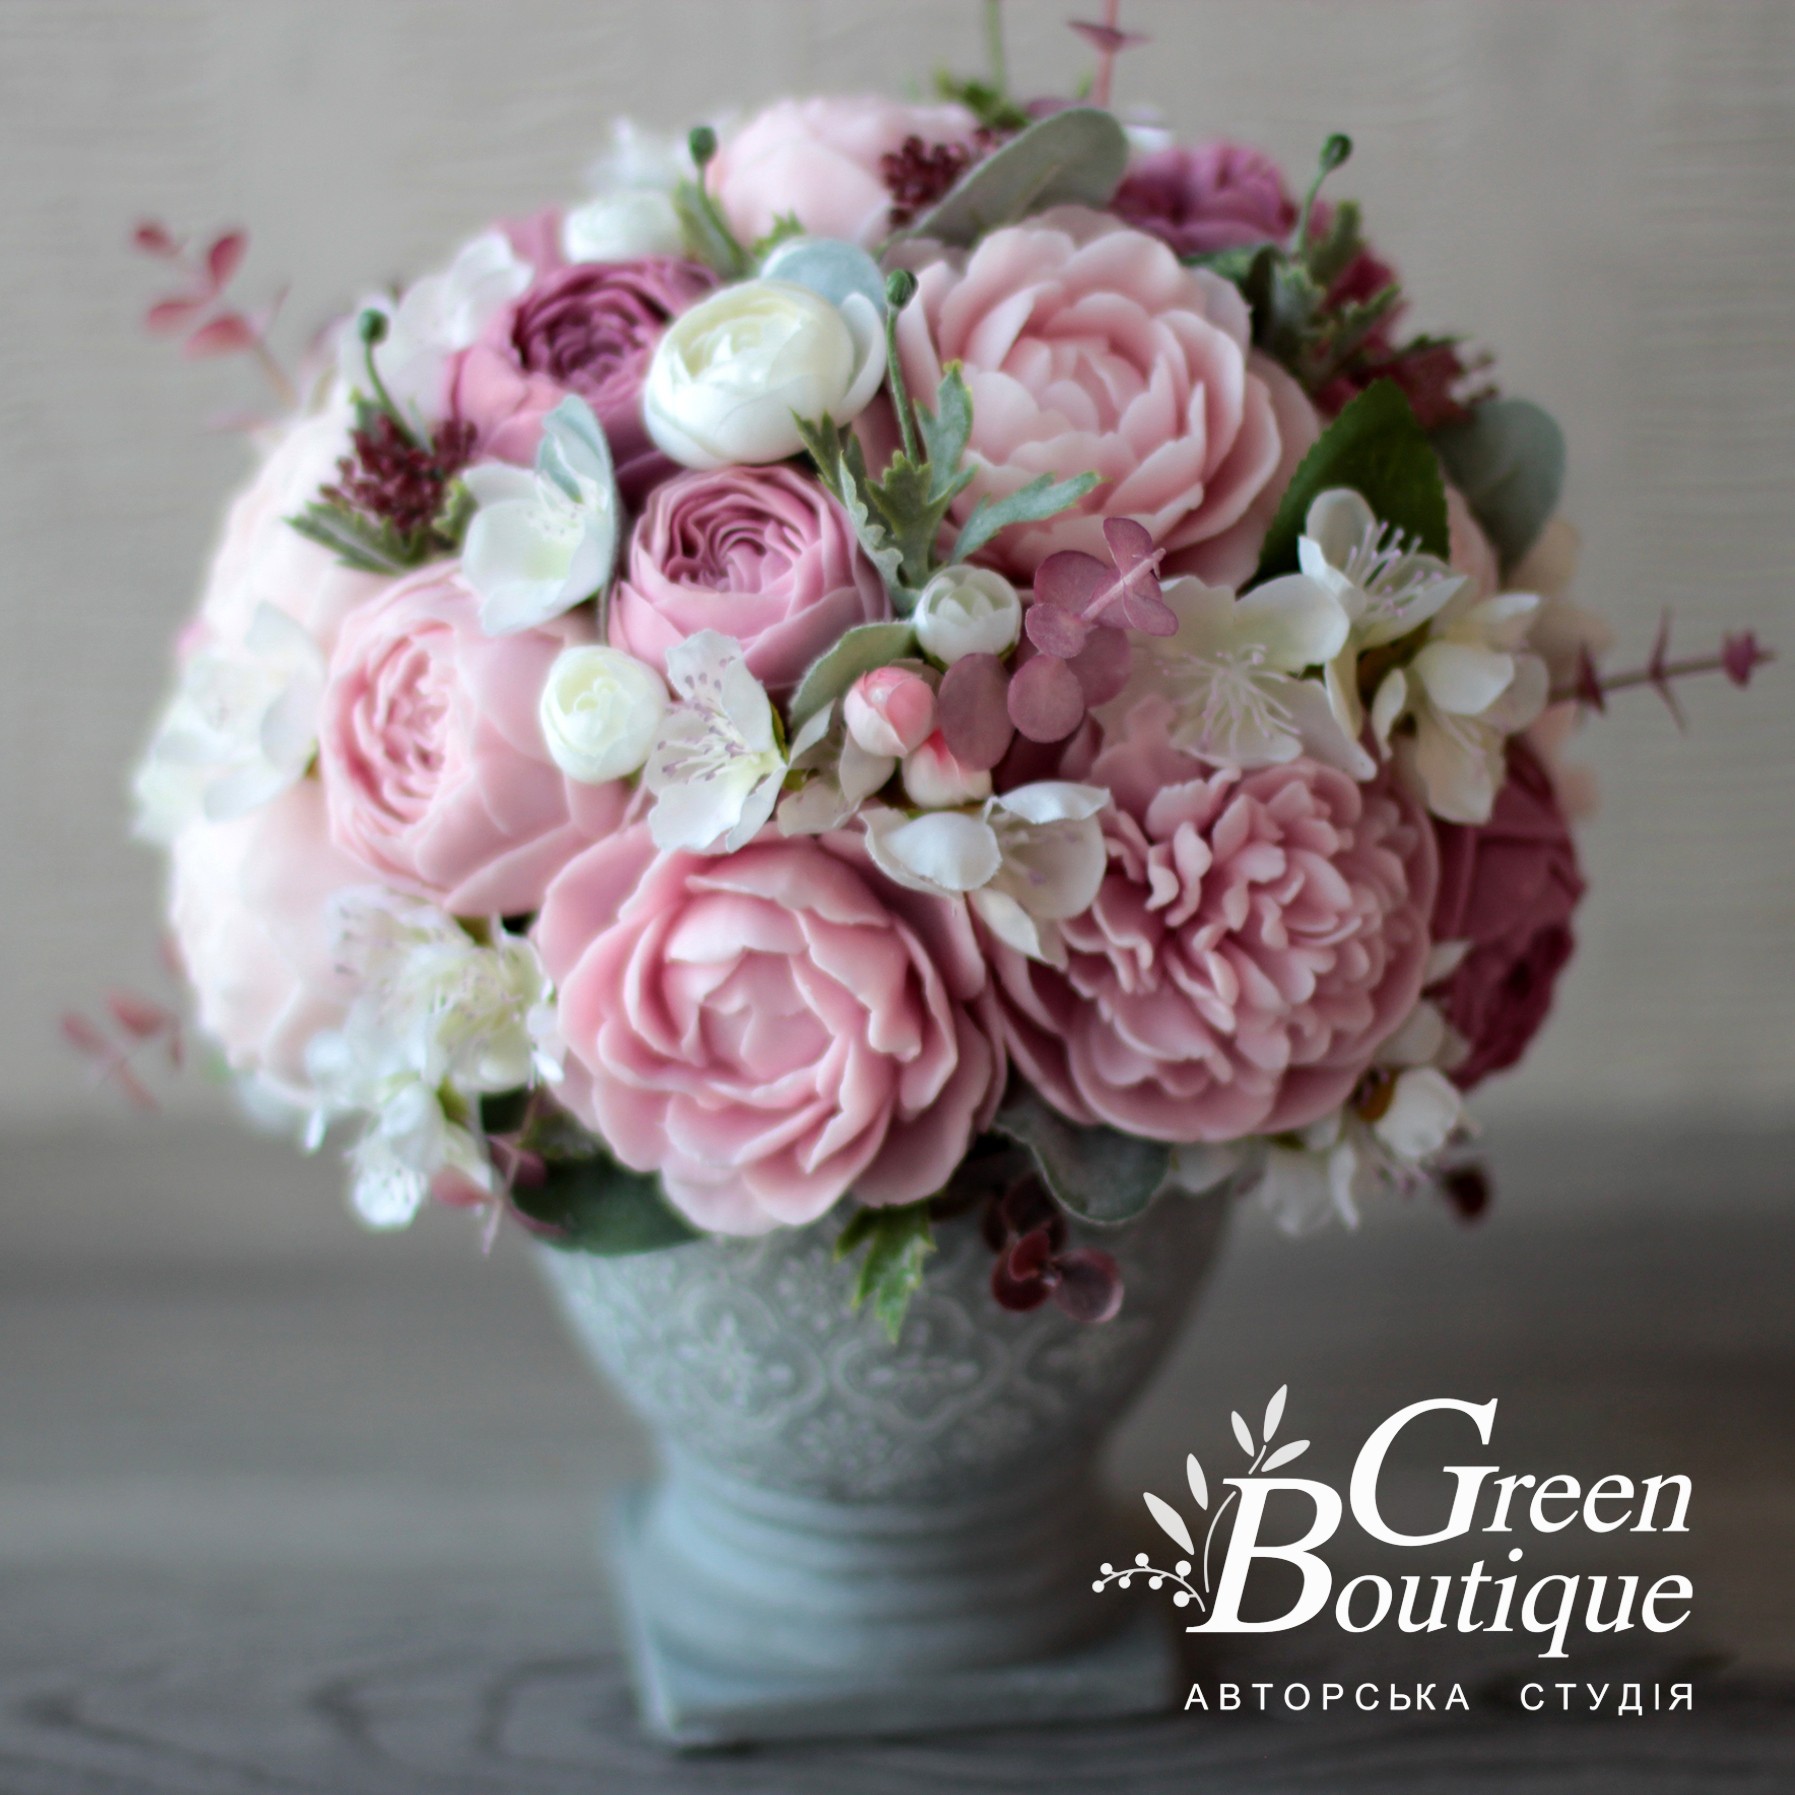 Luxurious interior bouquet of soap Roses and Peonies in a ceramic vase